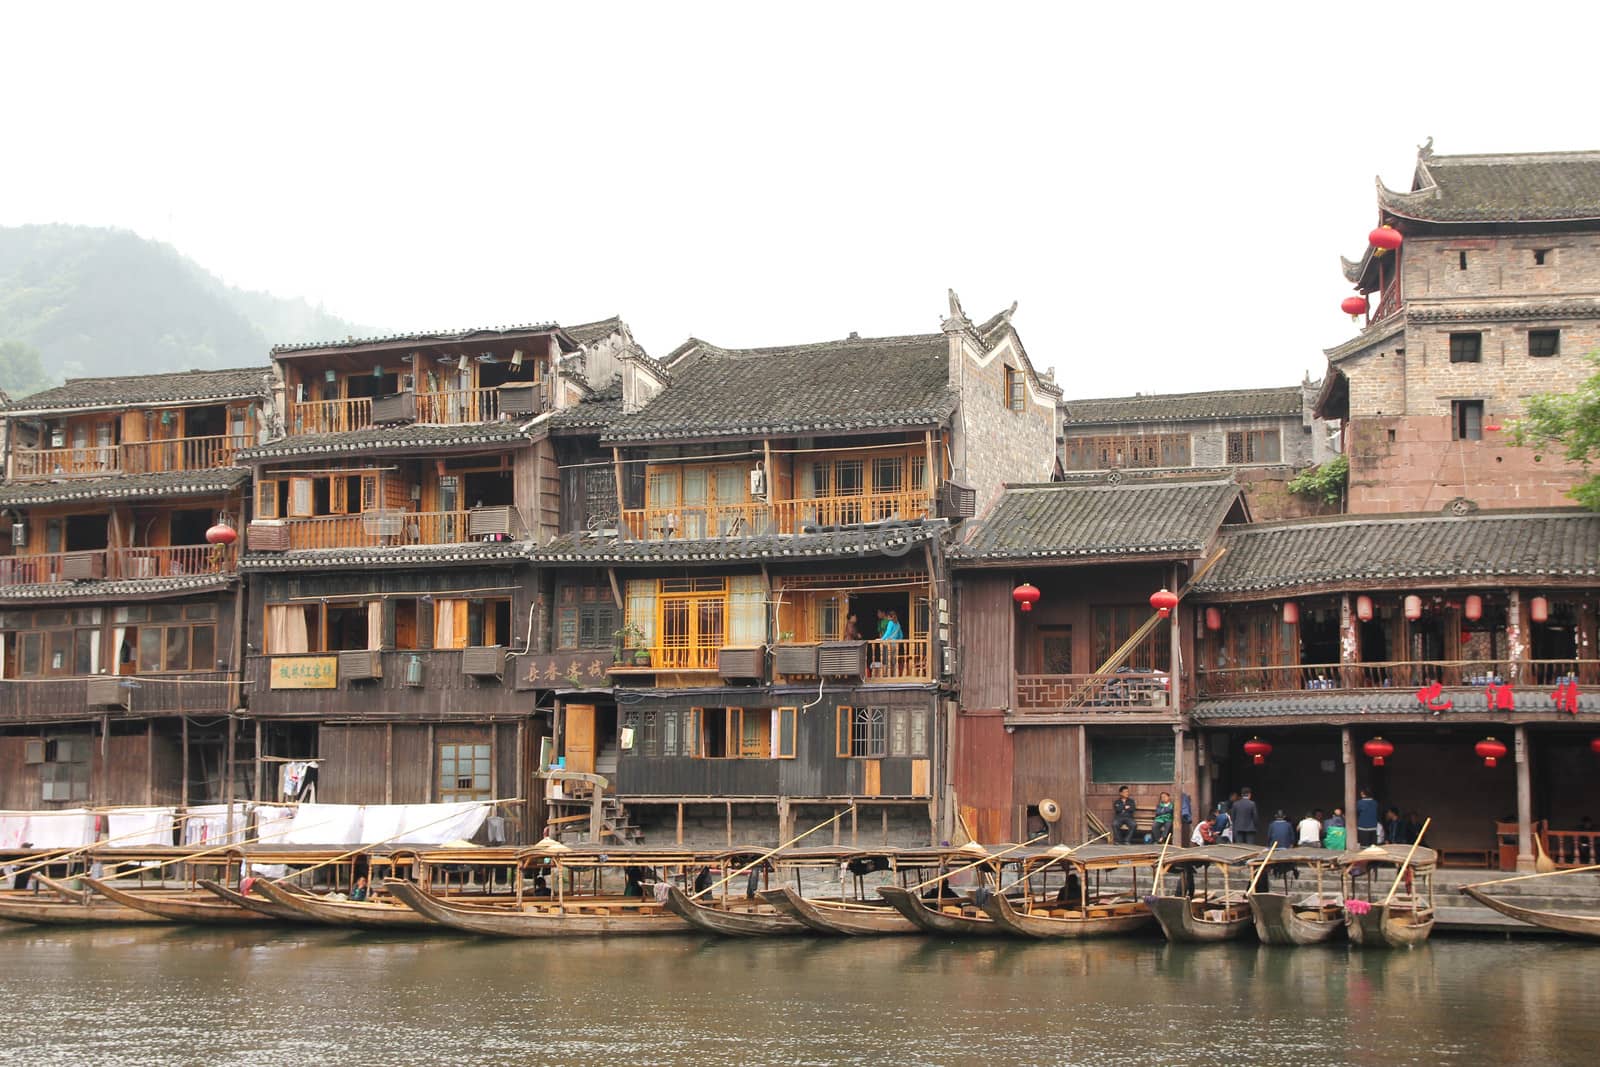 Fenghuang ancient town in China by kawing921